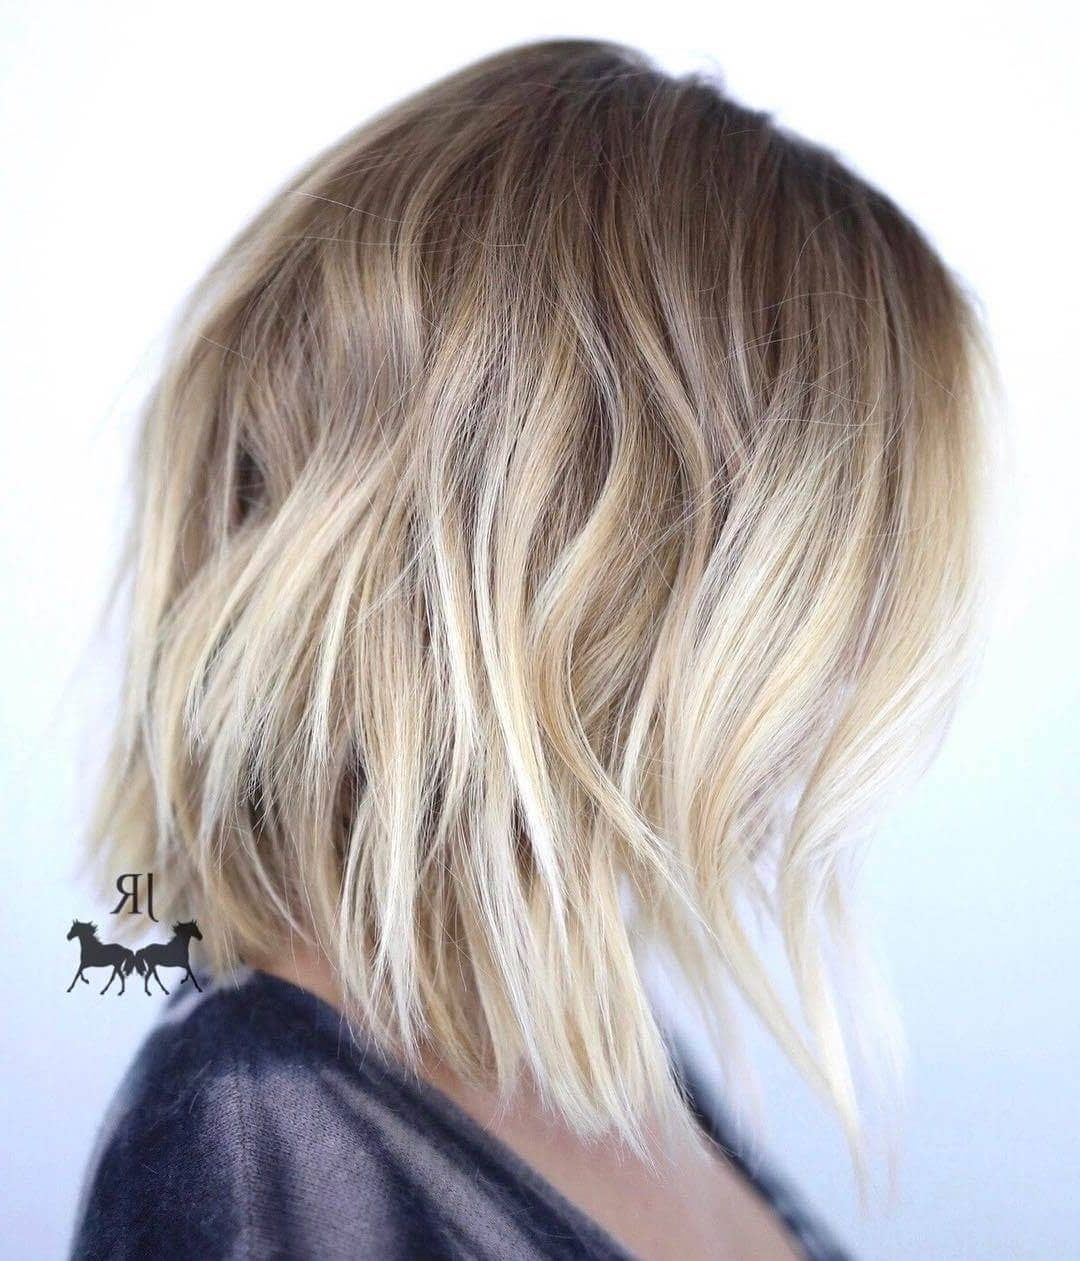 50 Fresh Short Blonde Hair Ideas To Update Your Style In 2018 Intended For Straight Cut Bob Hairstyles With Layers And Subtle Highlights (View 16 of 20)